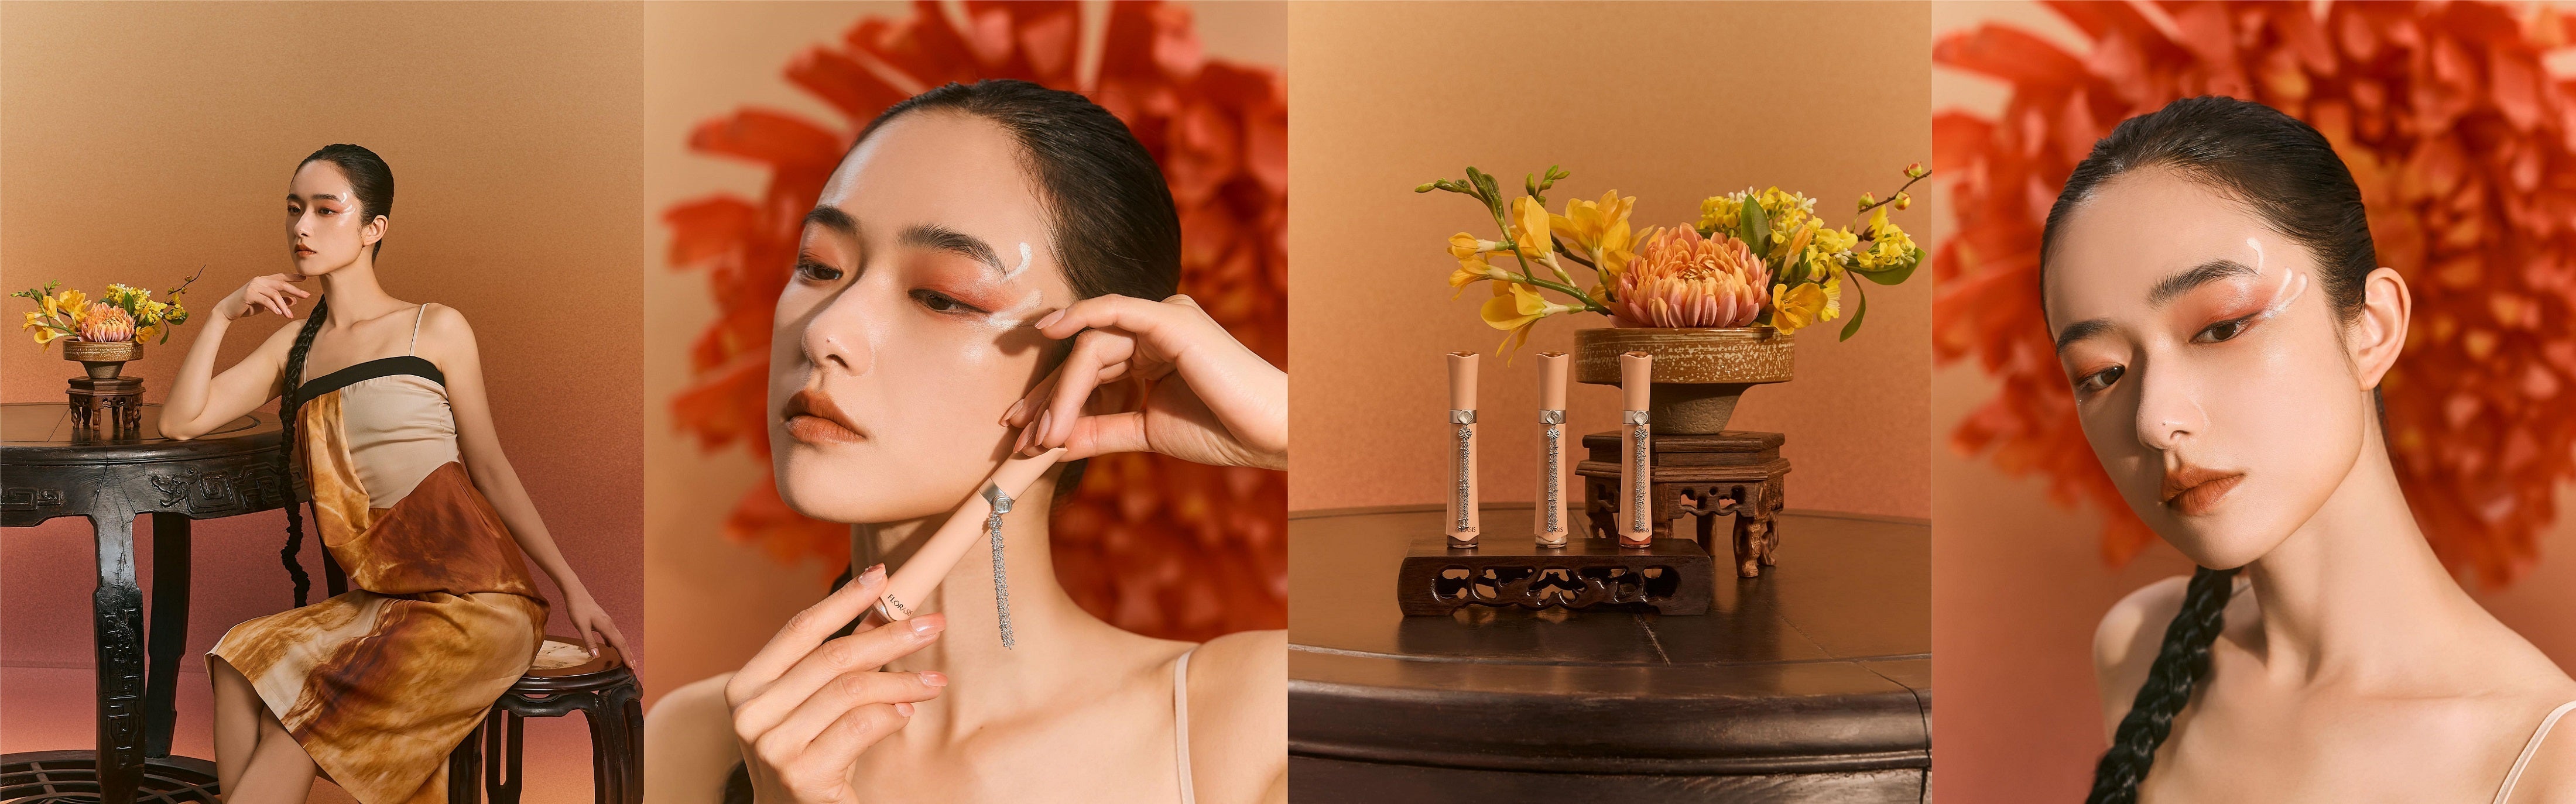 RADIATE IN AUTUMN BLOOMS: MYTHS OF THE AUTUMN FLORAL DEITIES AND INSPIRED LOOK OF WARM GLIMMER